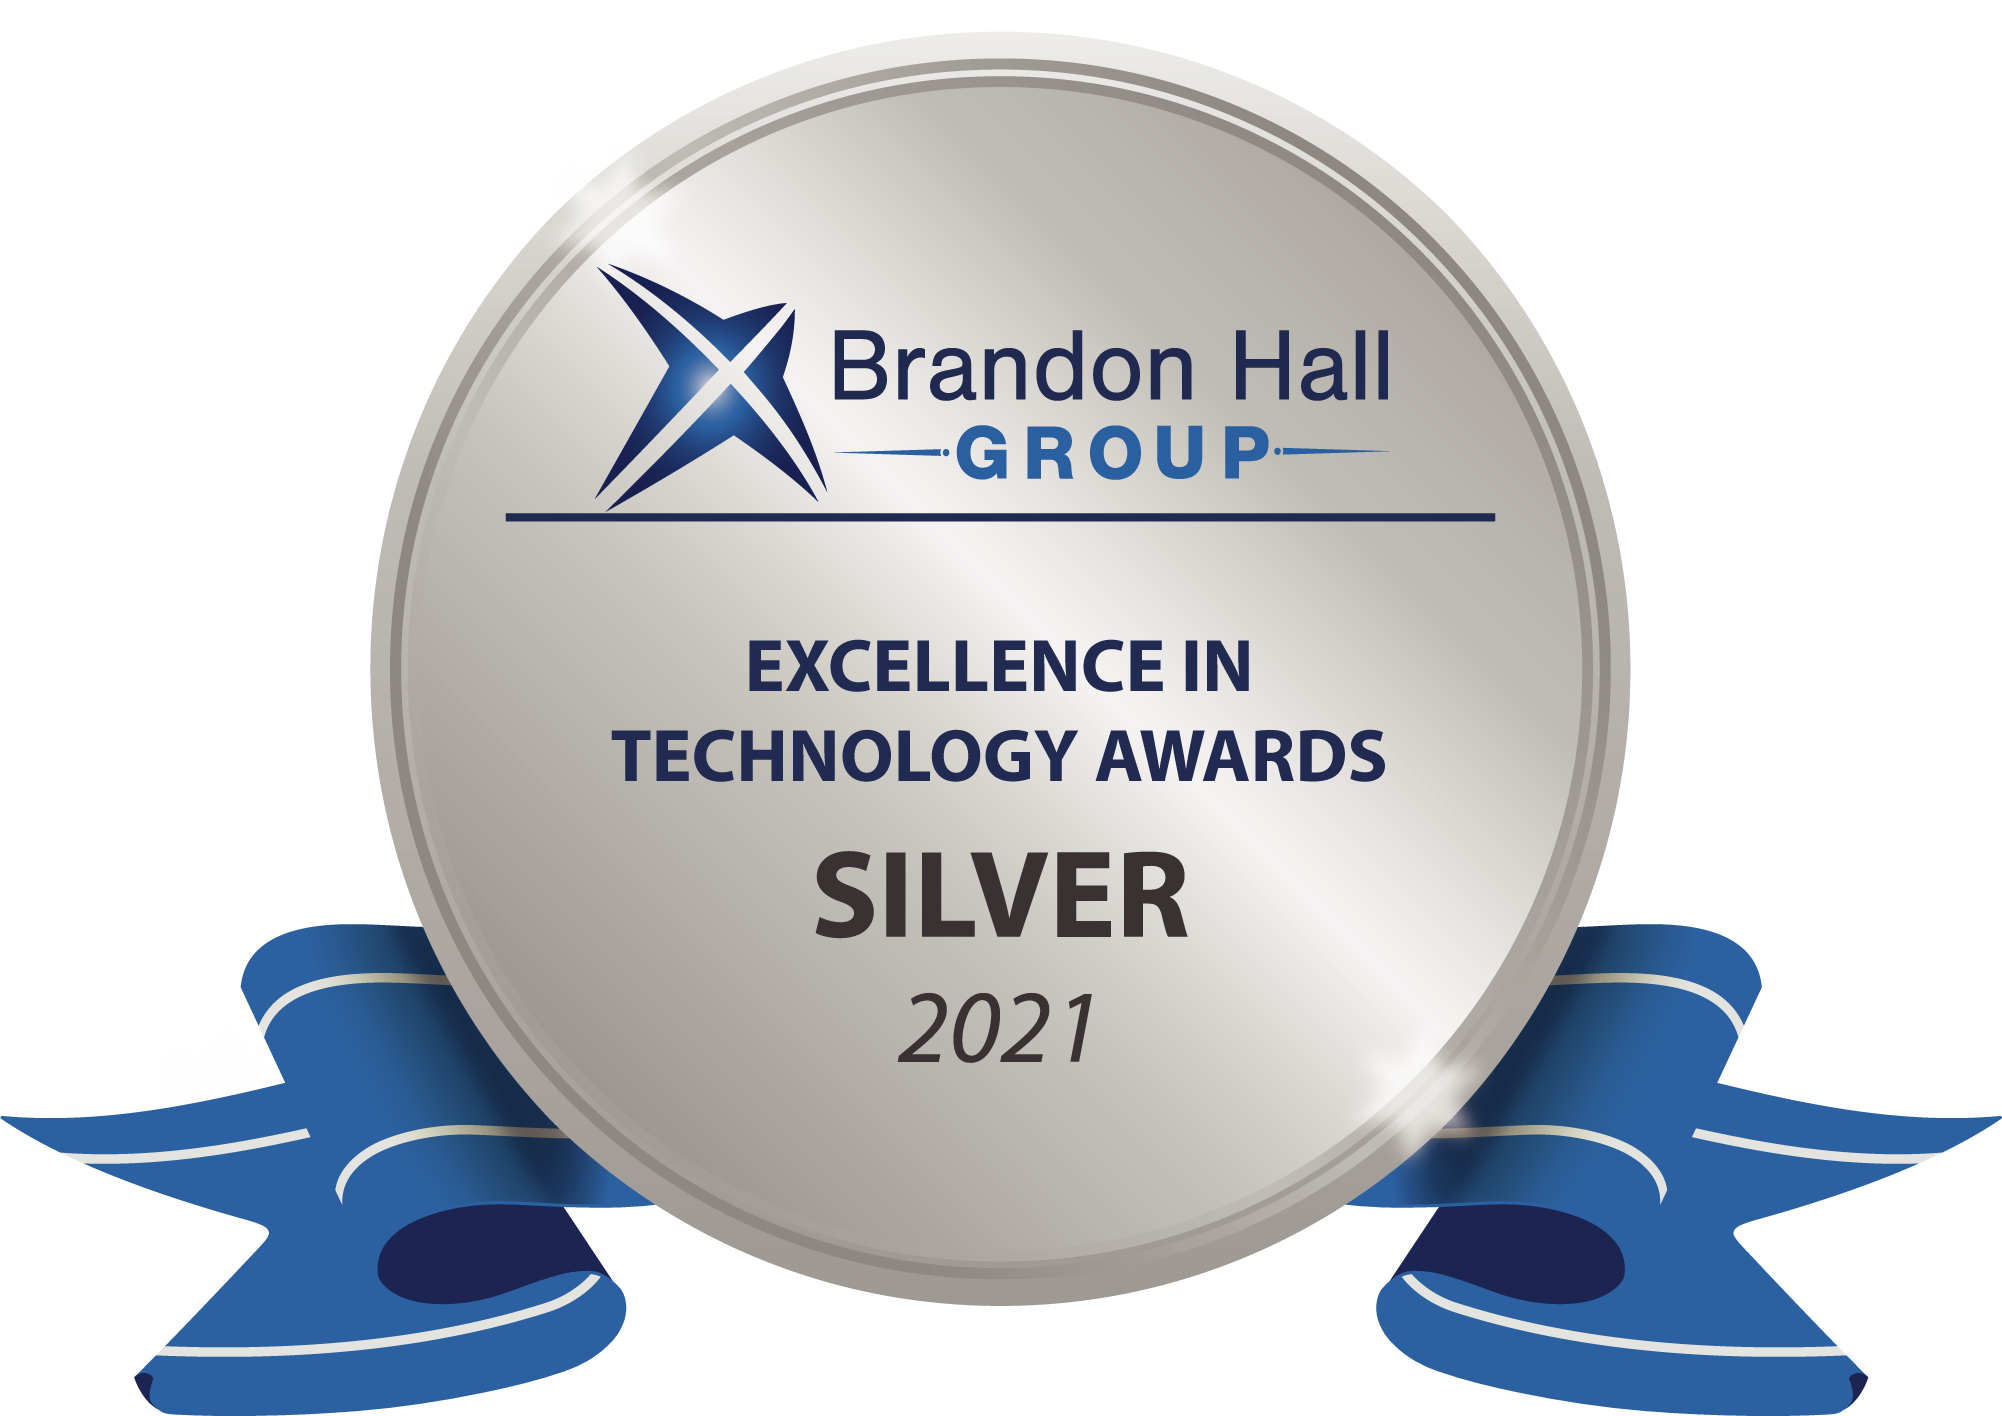 Mosaic Receives Excellence in Technology Award from Brandon Hall Awards.